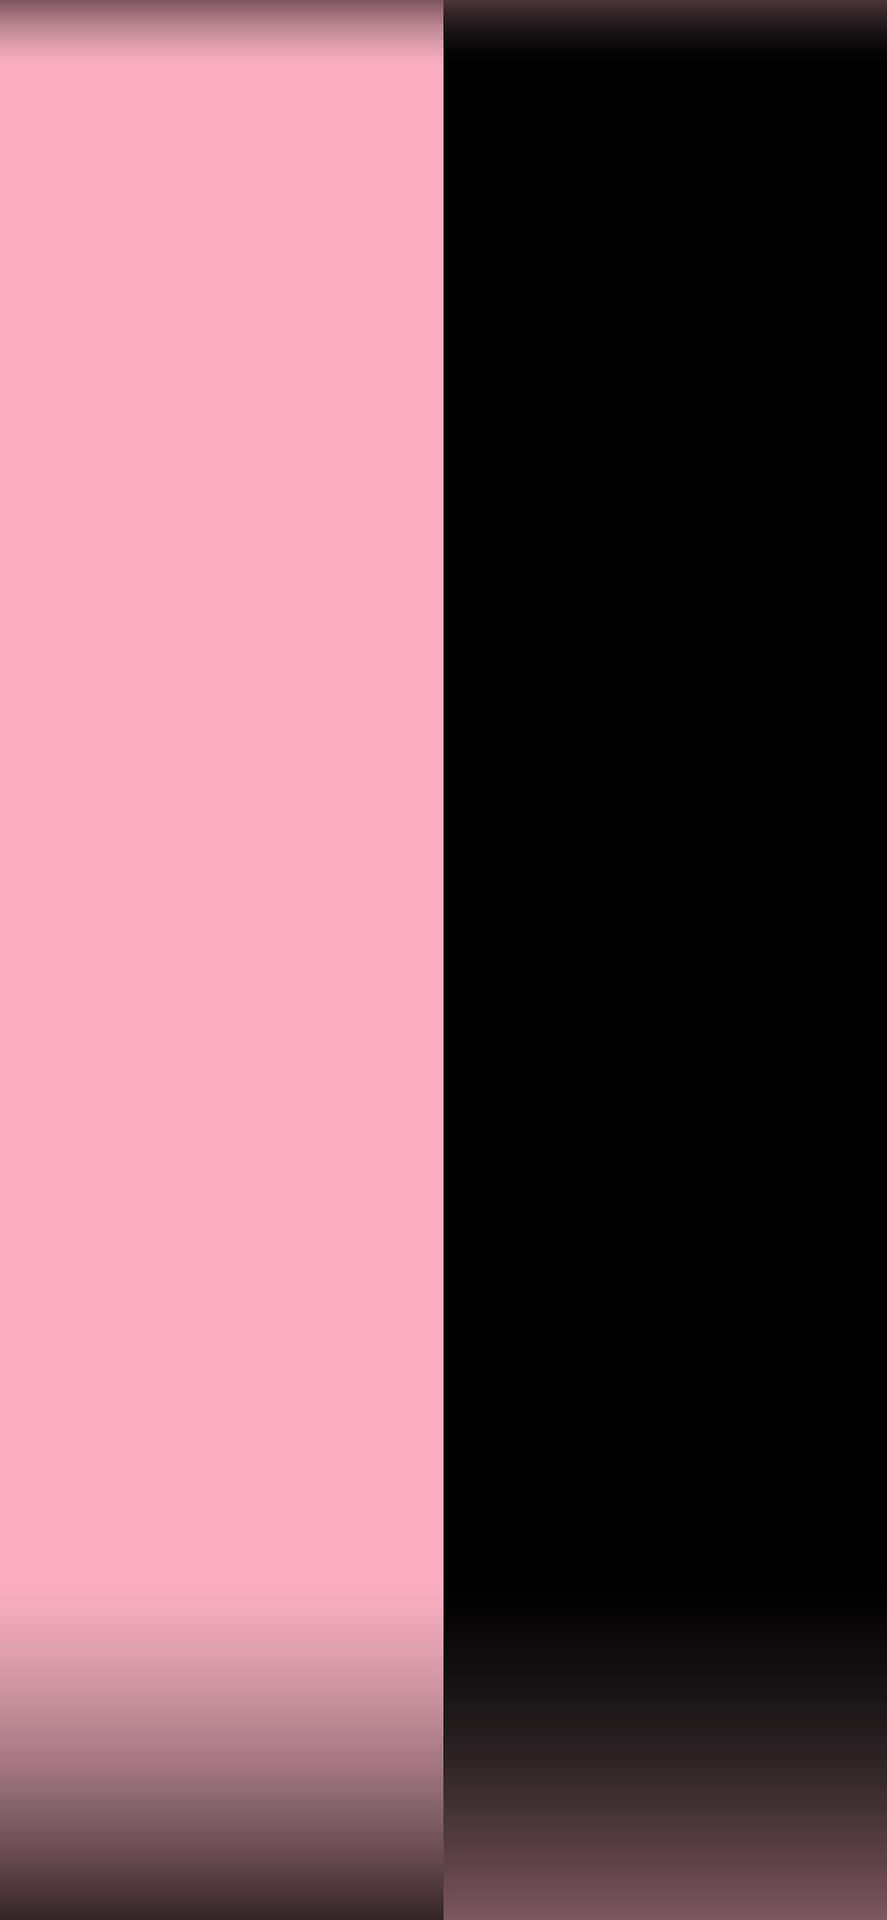 Black And Pink Iphone Wallpaper